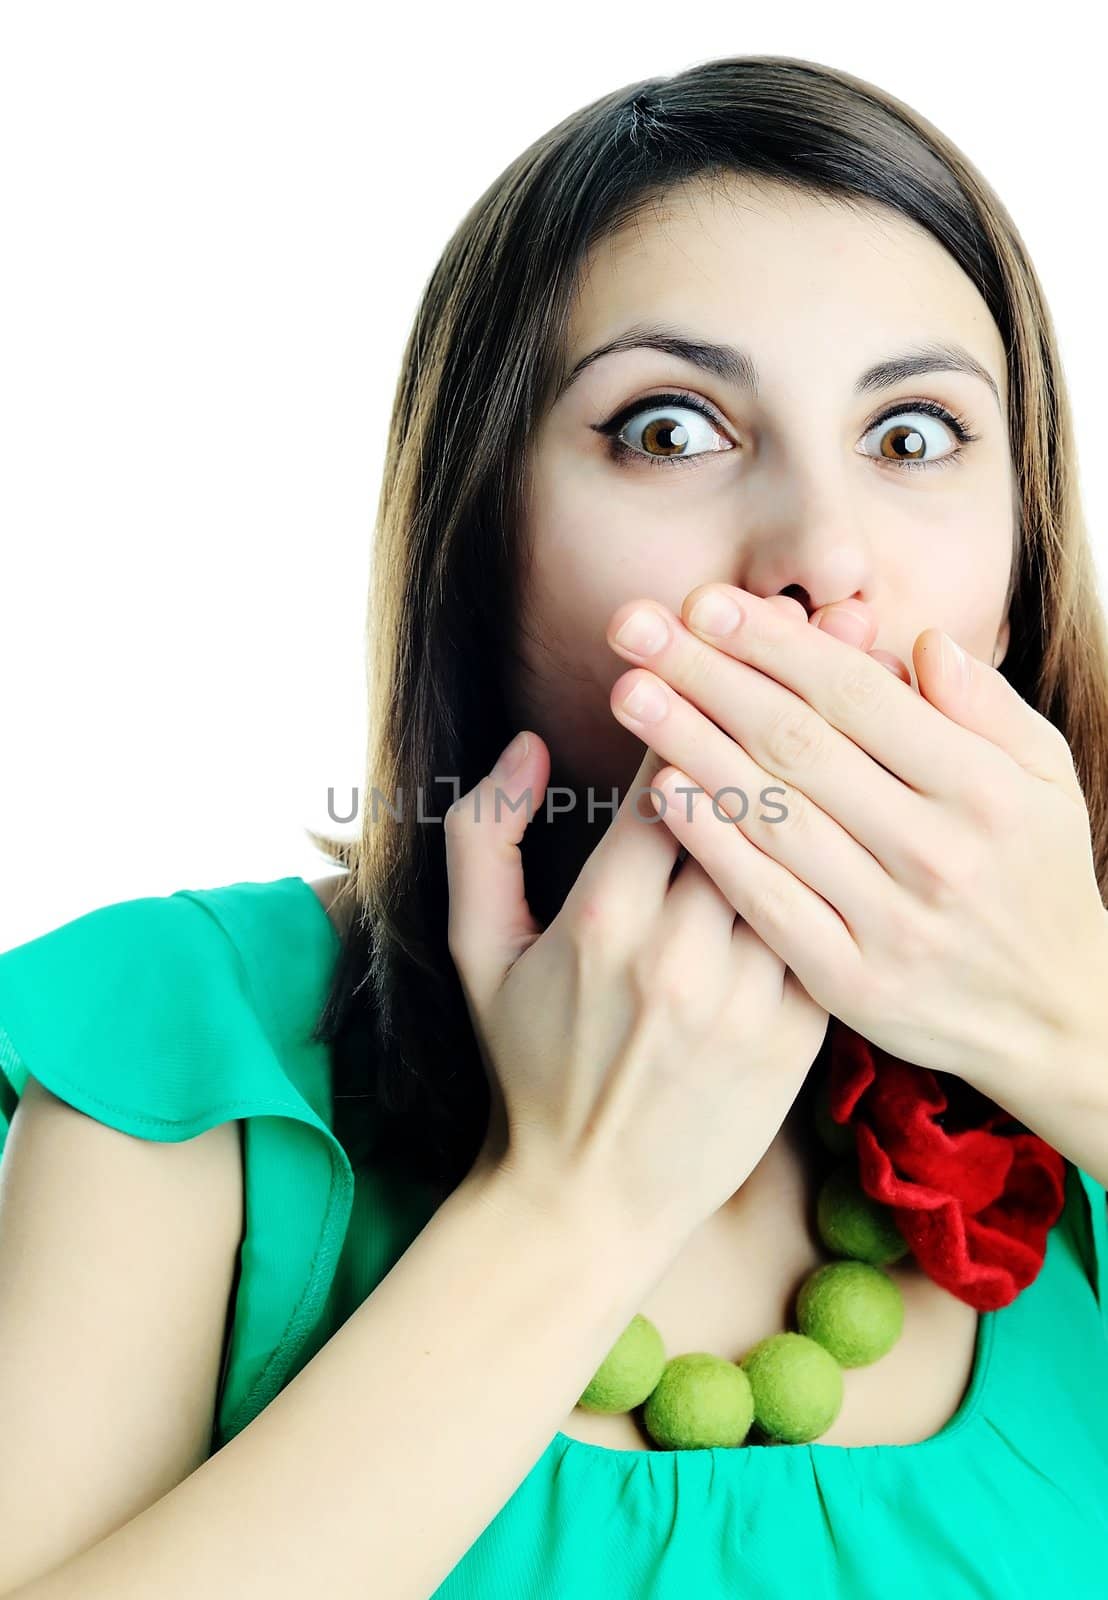 An image of a woman with her hands on her lips